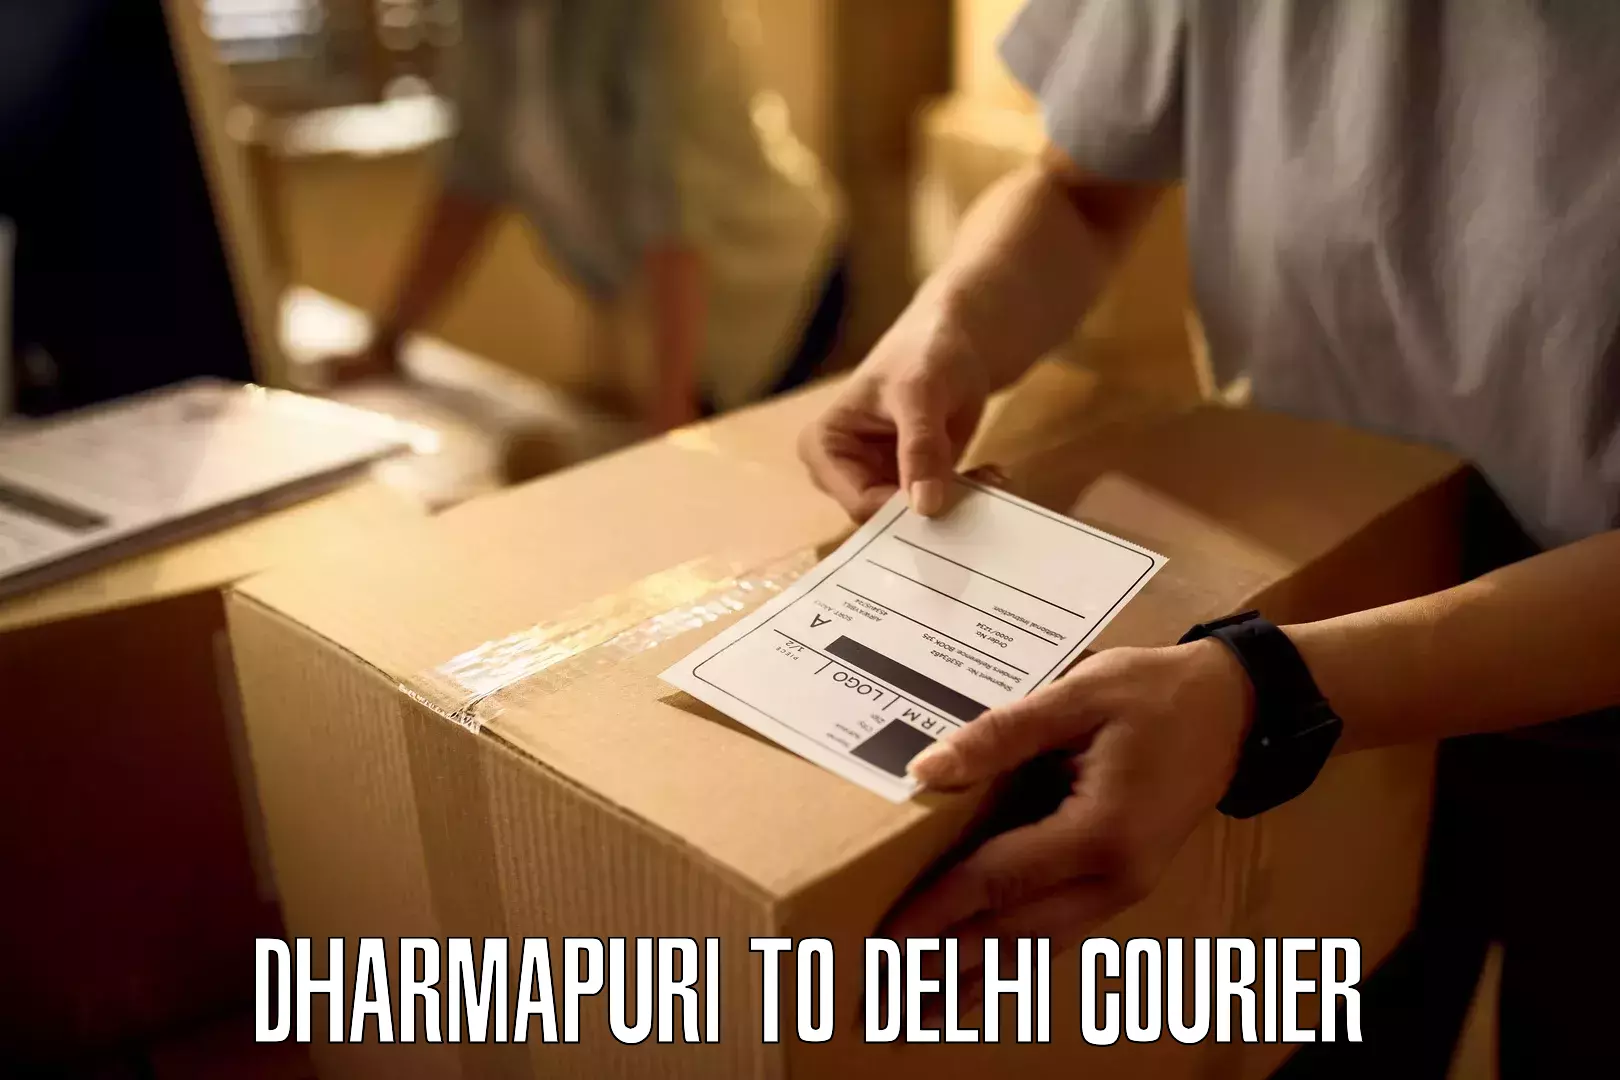 Nationwide parcel services Dharmapuri to NCR